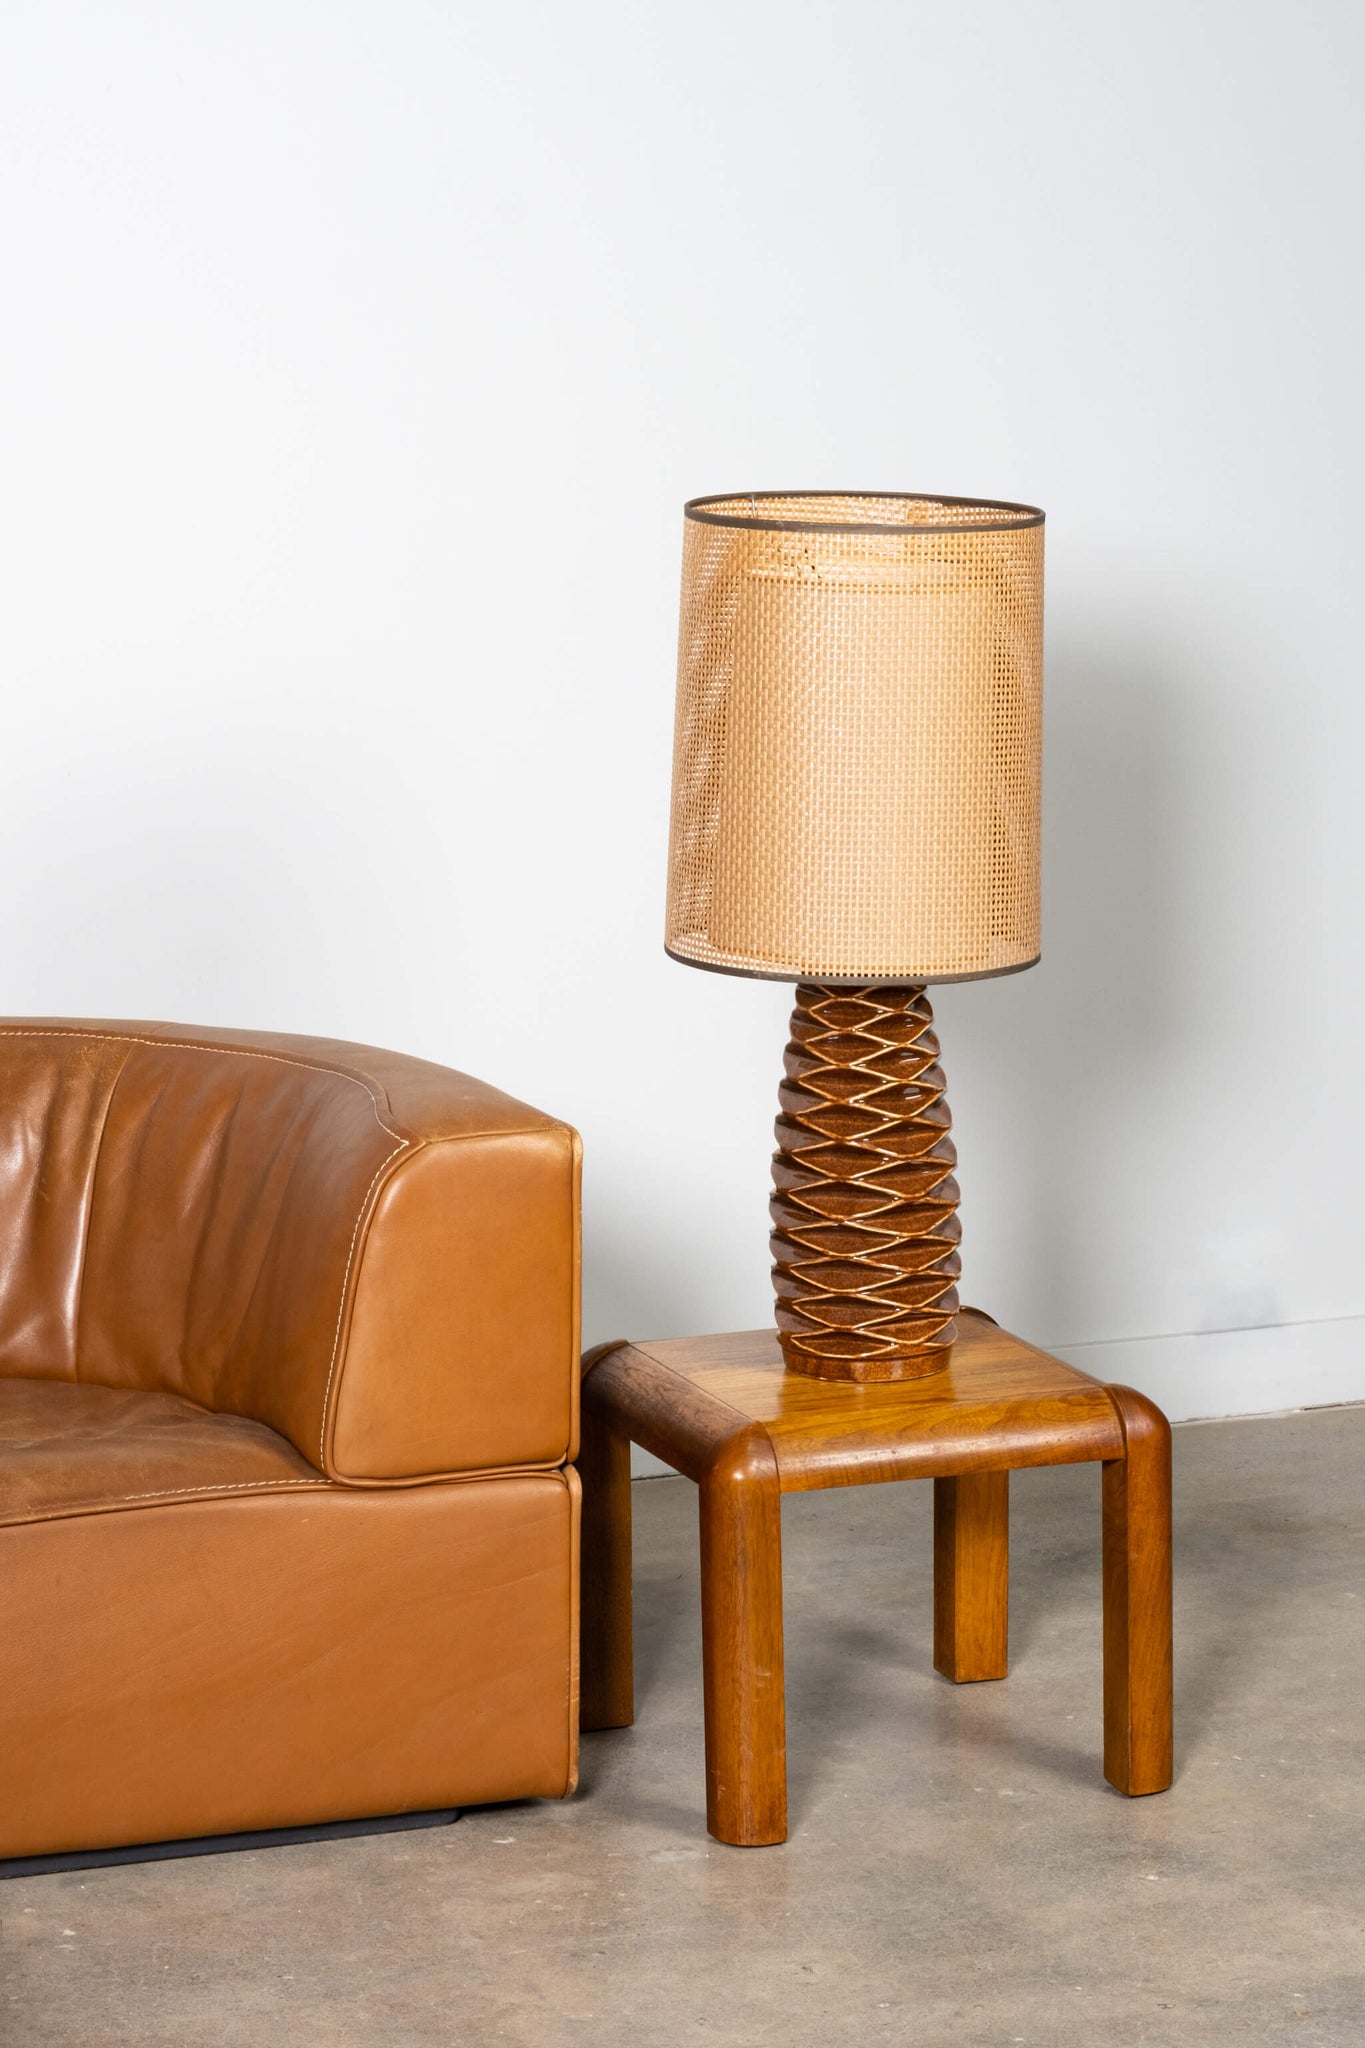 Vintage Ceramic Table Lamp with Double Layer Shade, shown on a wood end table with a brown leather couch